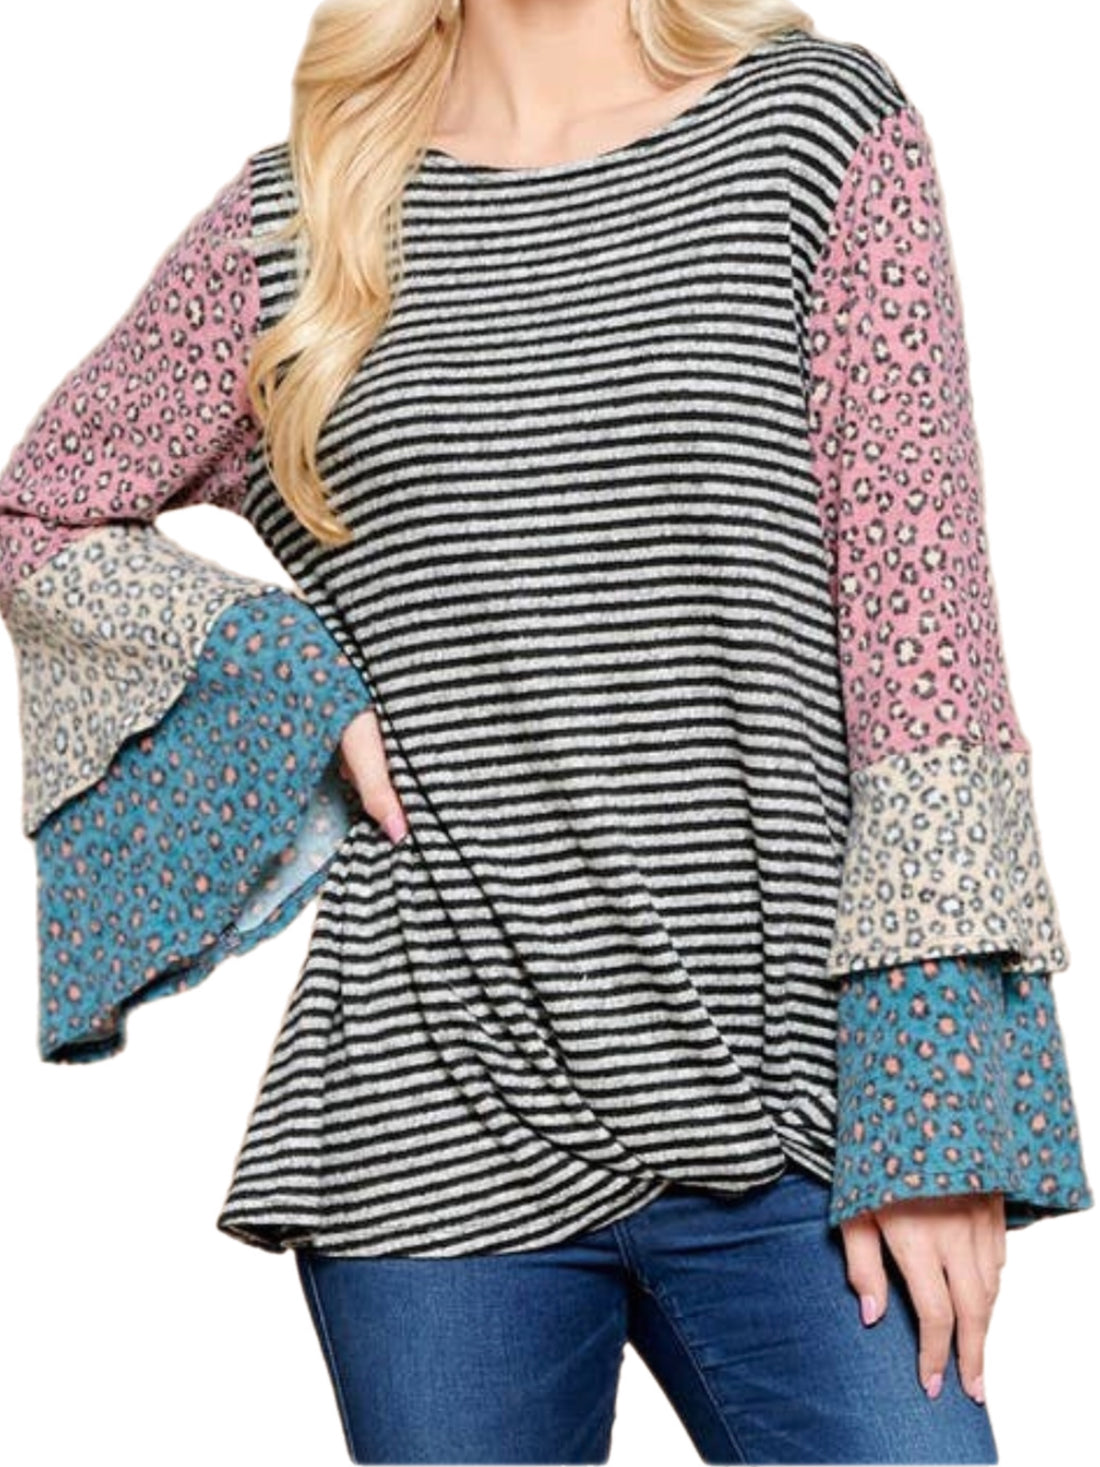 Gray Striped Top w/ Tiered Cheetah Sleeves